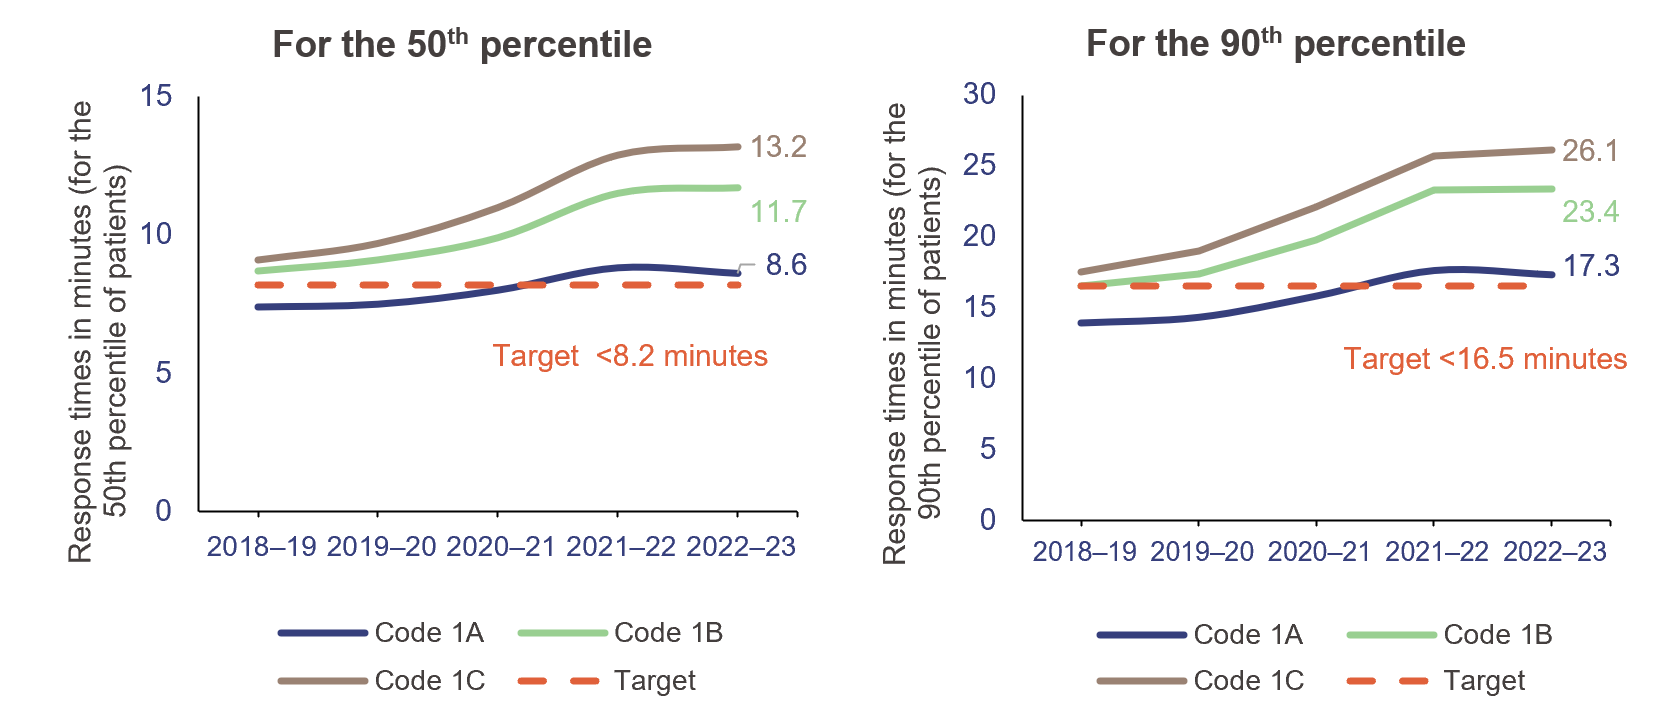 Graph showing Queensland ambulance response time performance from 2018–19 to 2022–23 for code 1